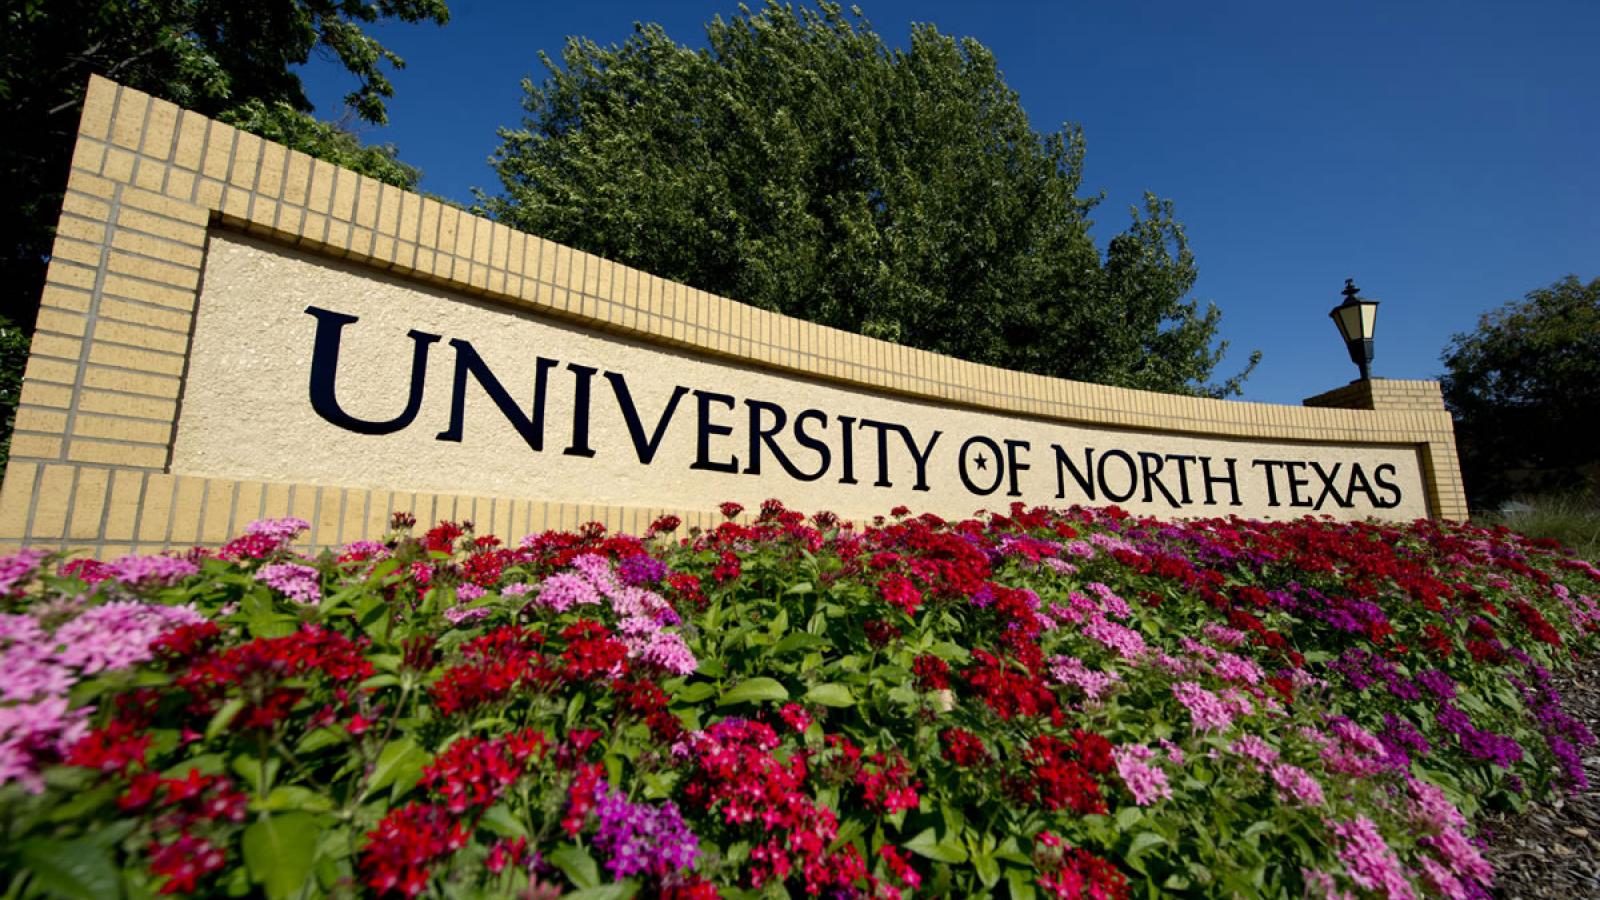 University of North Texas sign with flowers